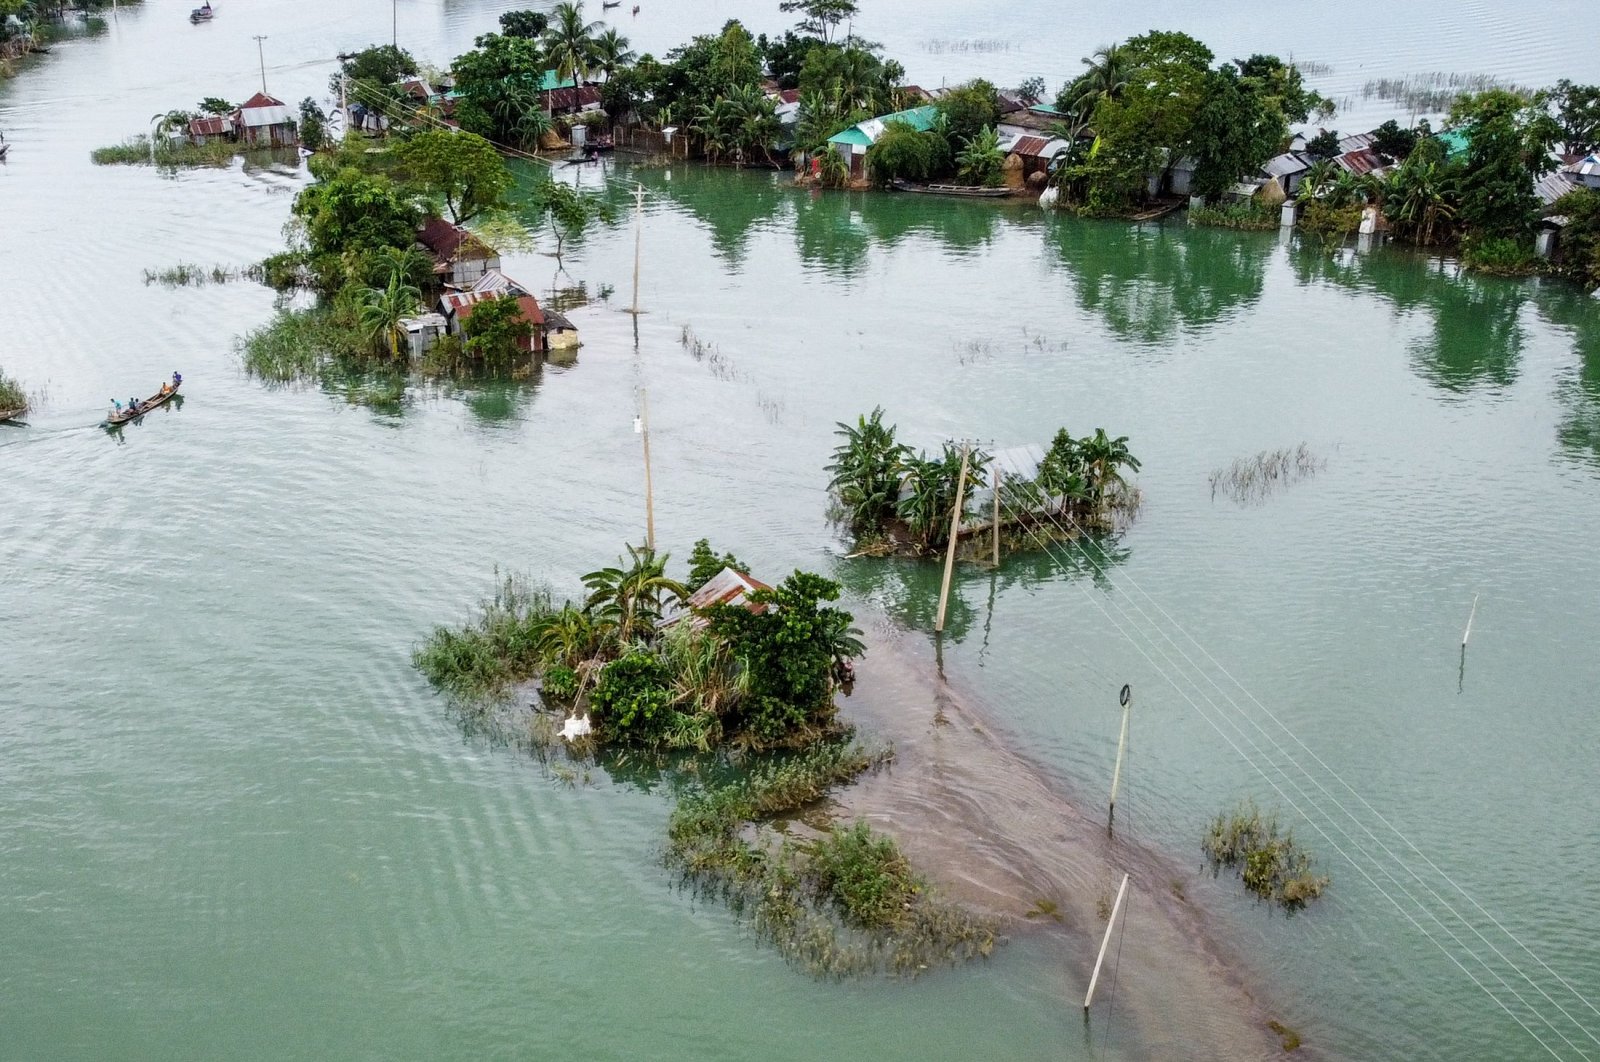 This aerial view shows flooded houses in Sunamganj, Bangladesh on July 15, 2020. (AFP Photo)